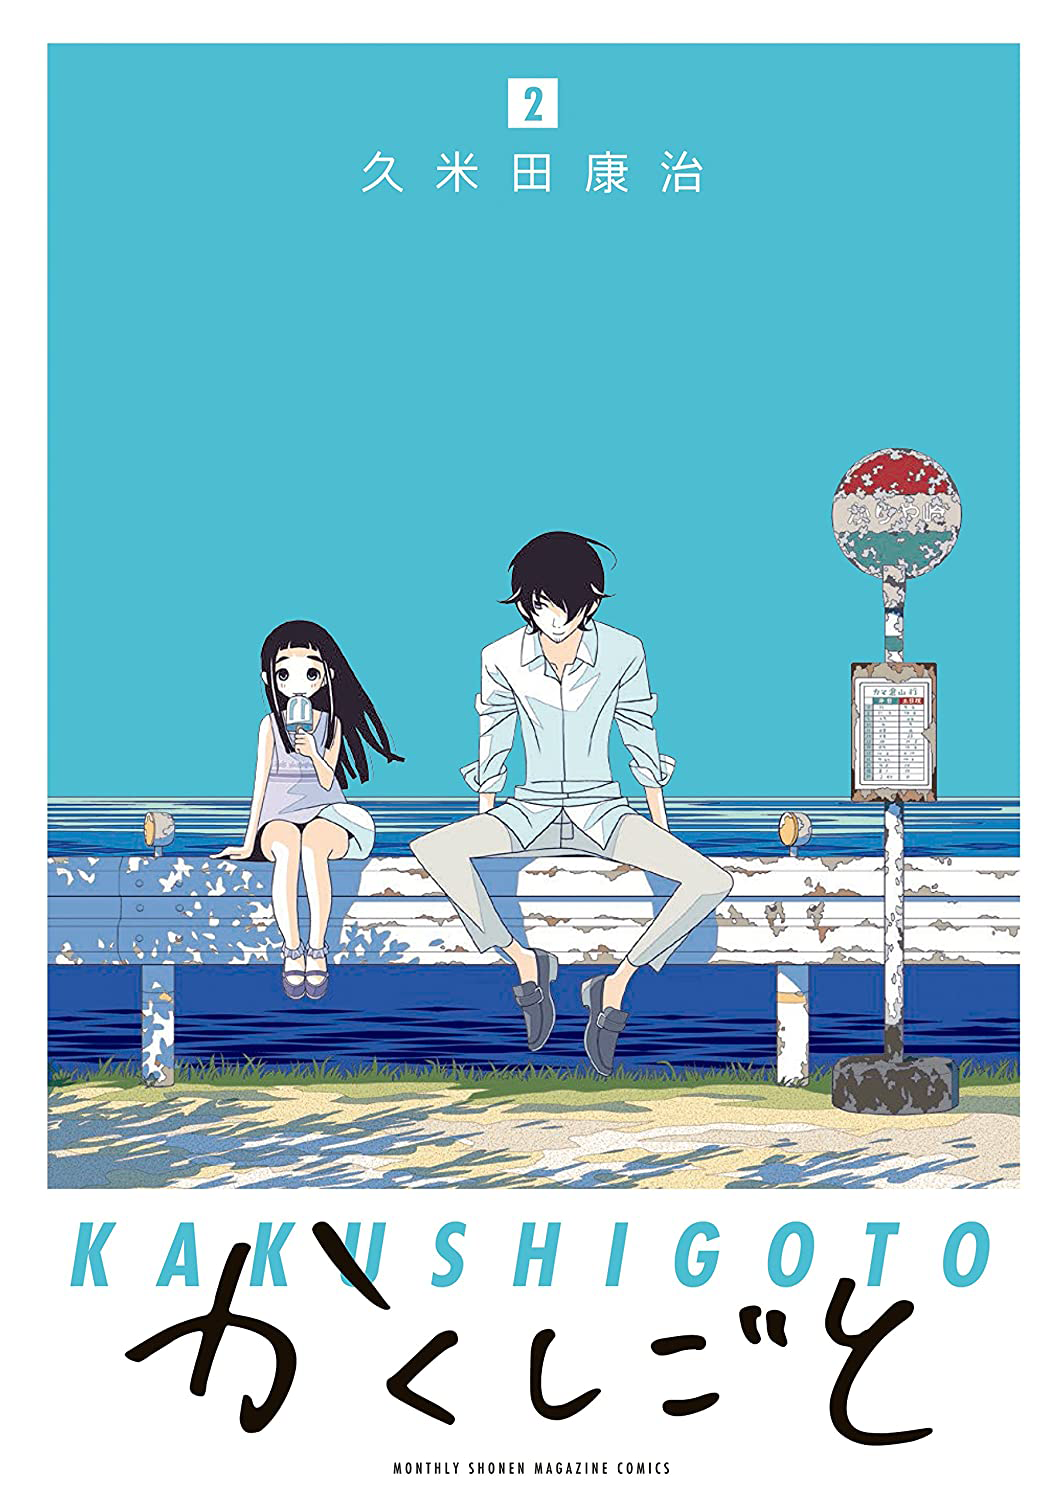 Kakushigoto Compilation Movie Releases Trailer Ahead of July Premiere